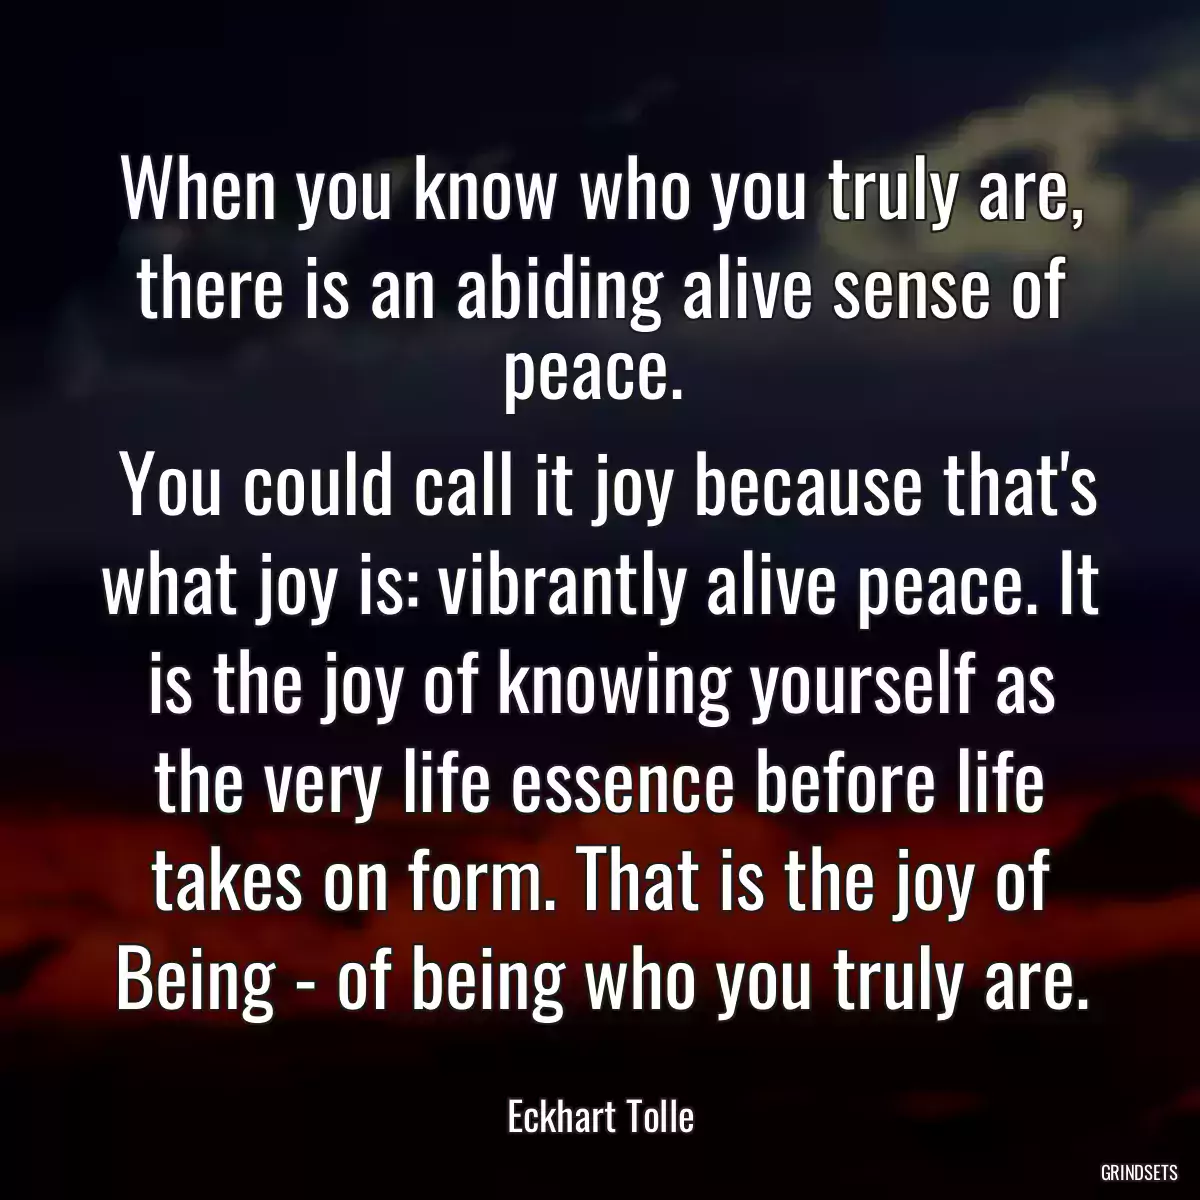 When you know who you truly are, there is an abiding alive sense of peace. 
 You could call it joy because that\'s what joy is: vibrantly alive peace. It is the joy of knowing yourself as the very life essence before life takes on form. That is the joy of Being - of being who you truly are.